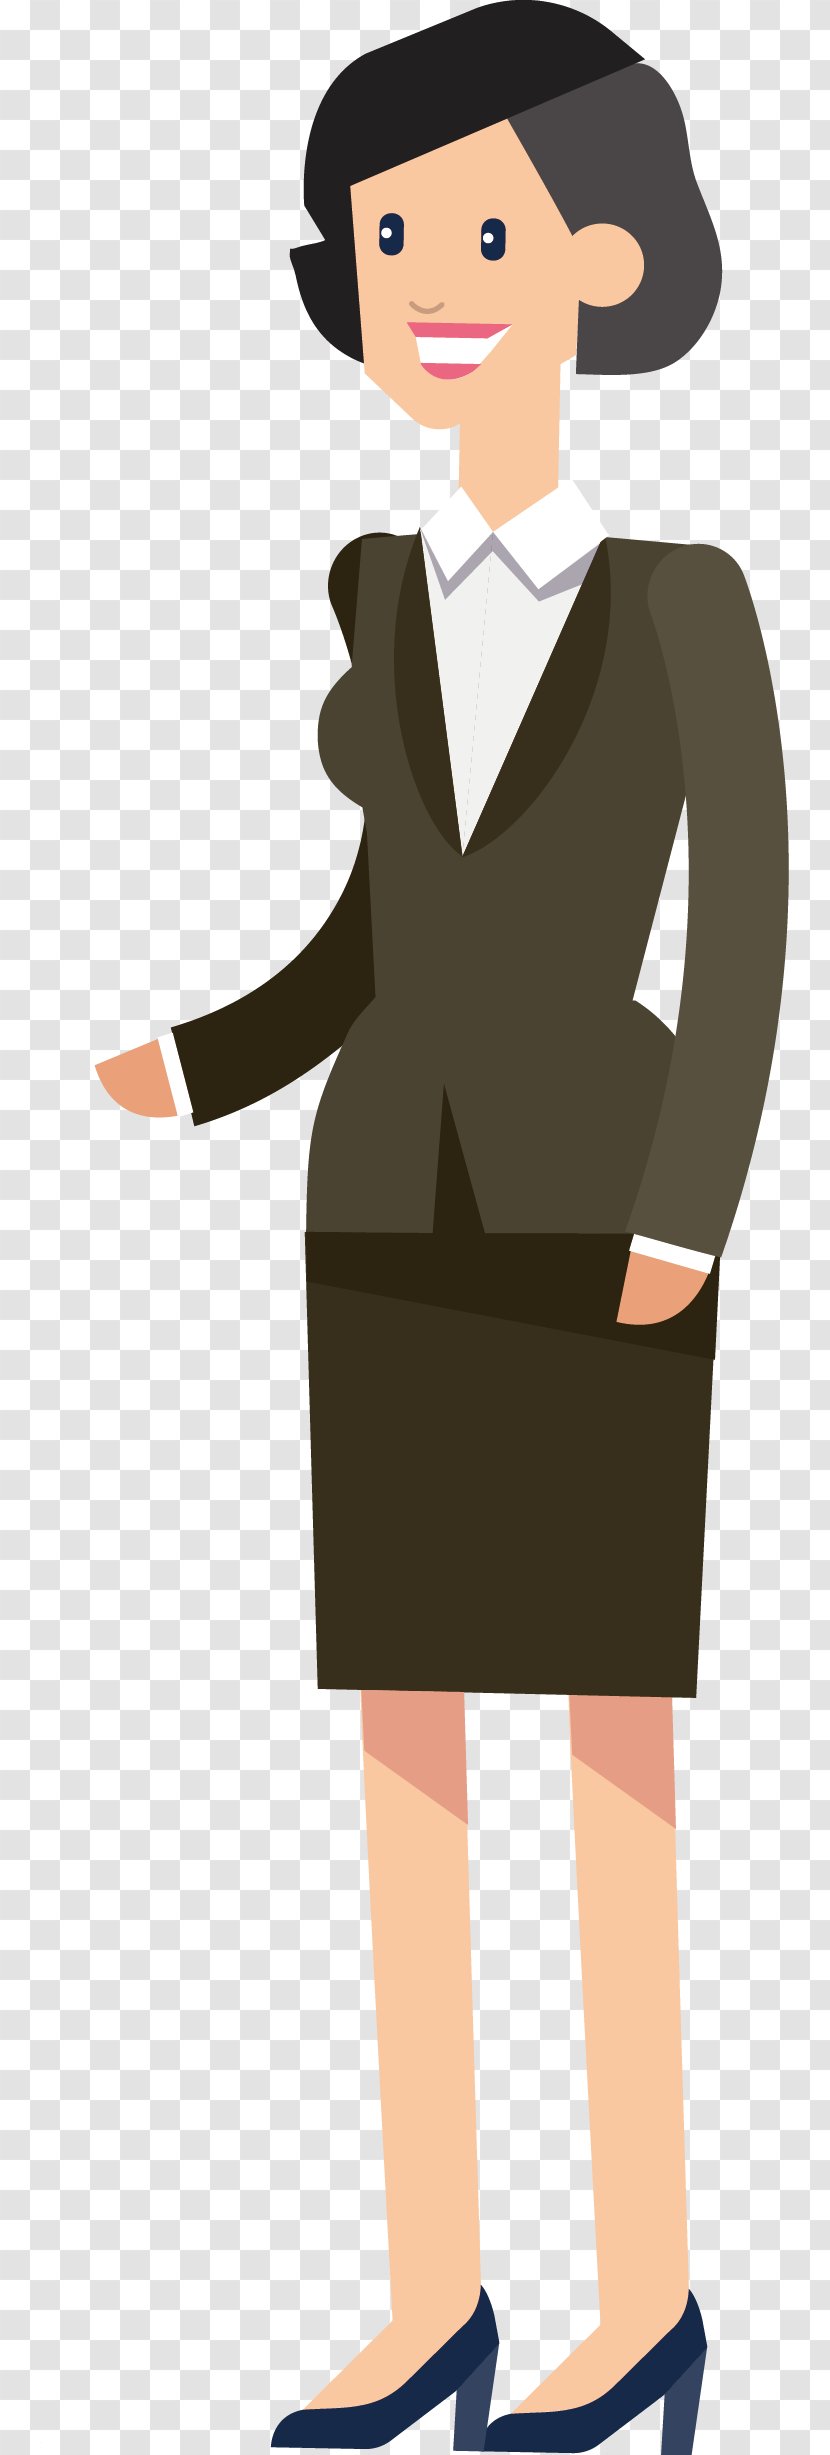 Clip Art - Heart - Female Business People Vector Transparent PNG